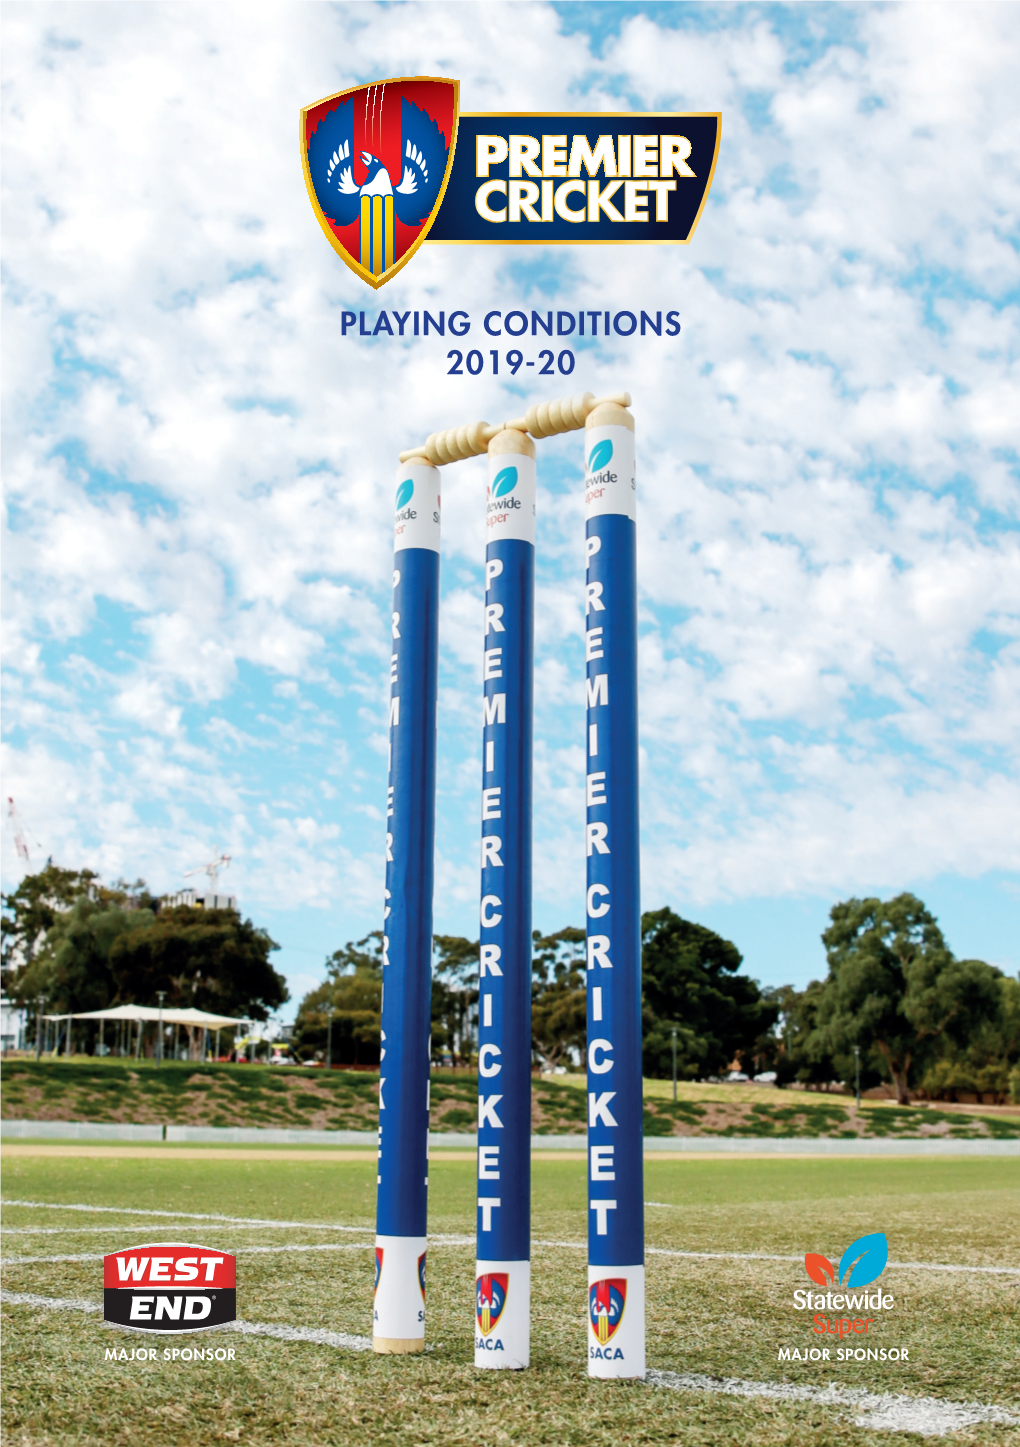 Playing Conditions 2019-20